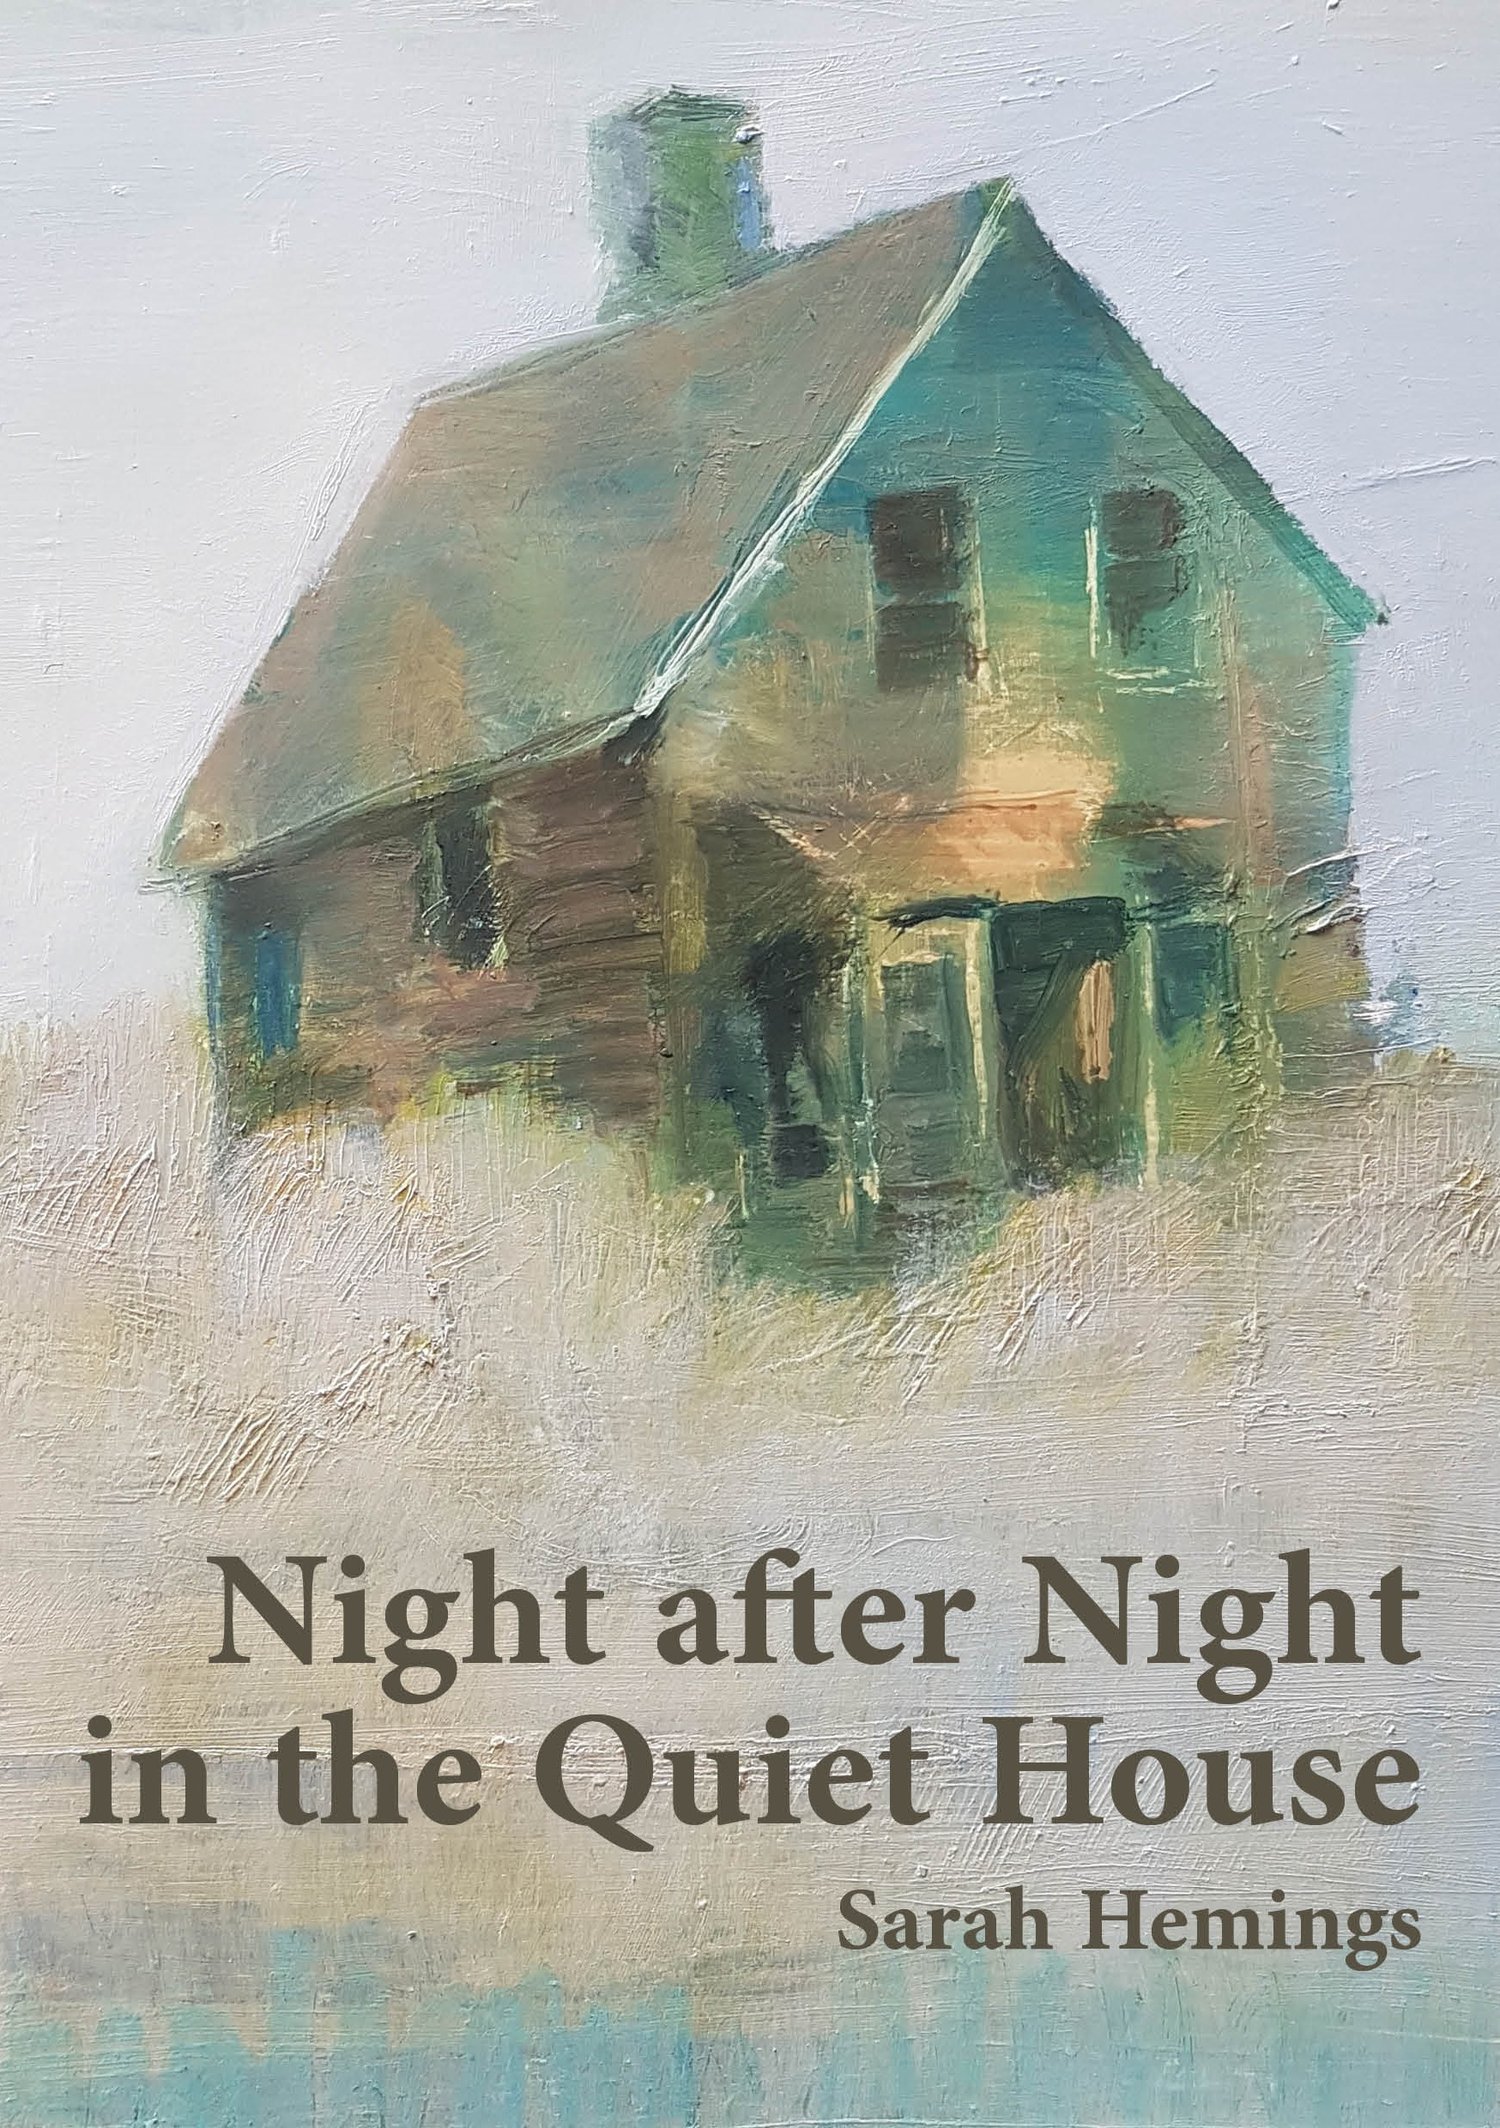 Night after Night in the Quiet House by Sarah Hemings